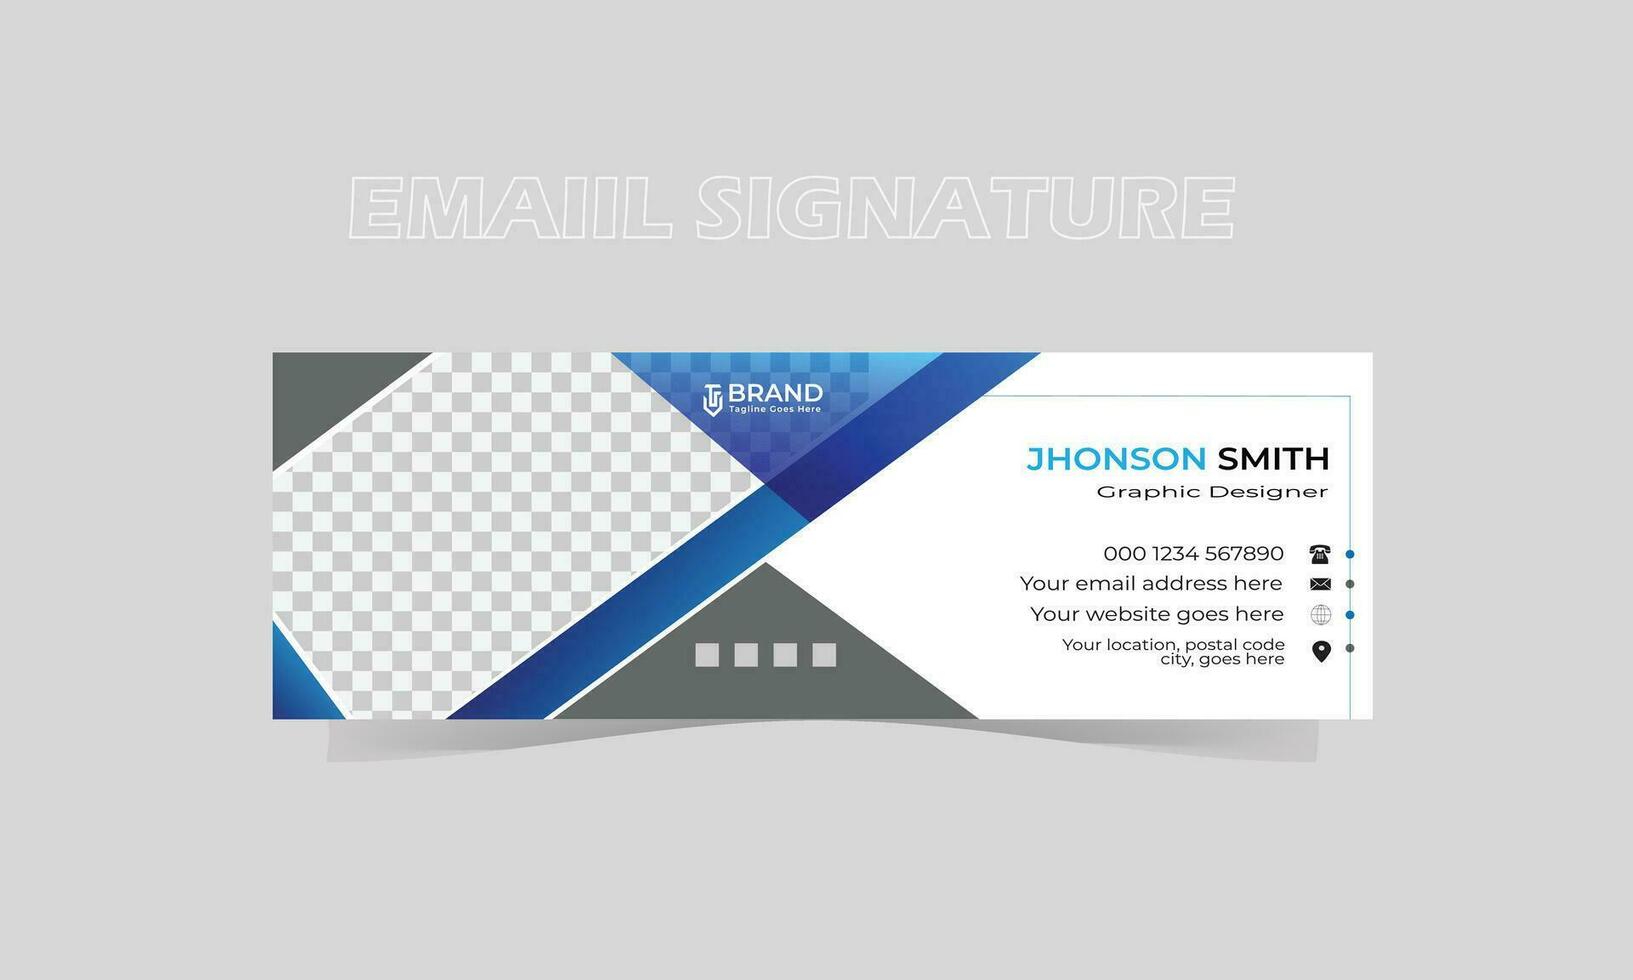 Email signature Template of geometric shapes vector